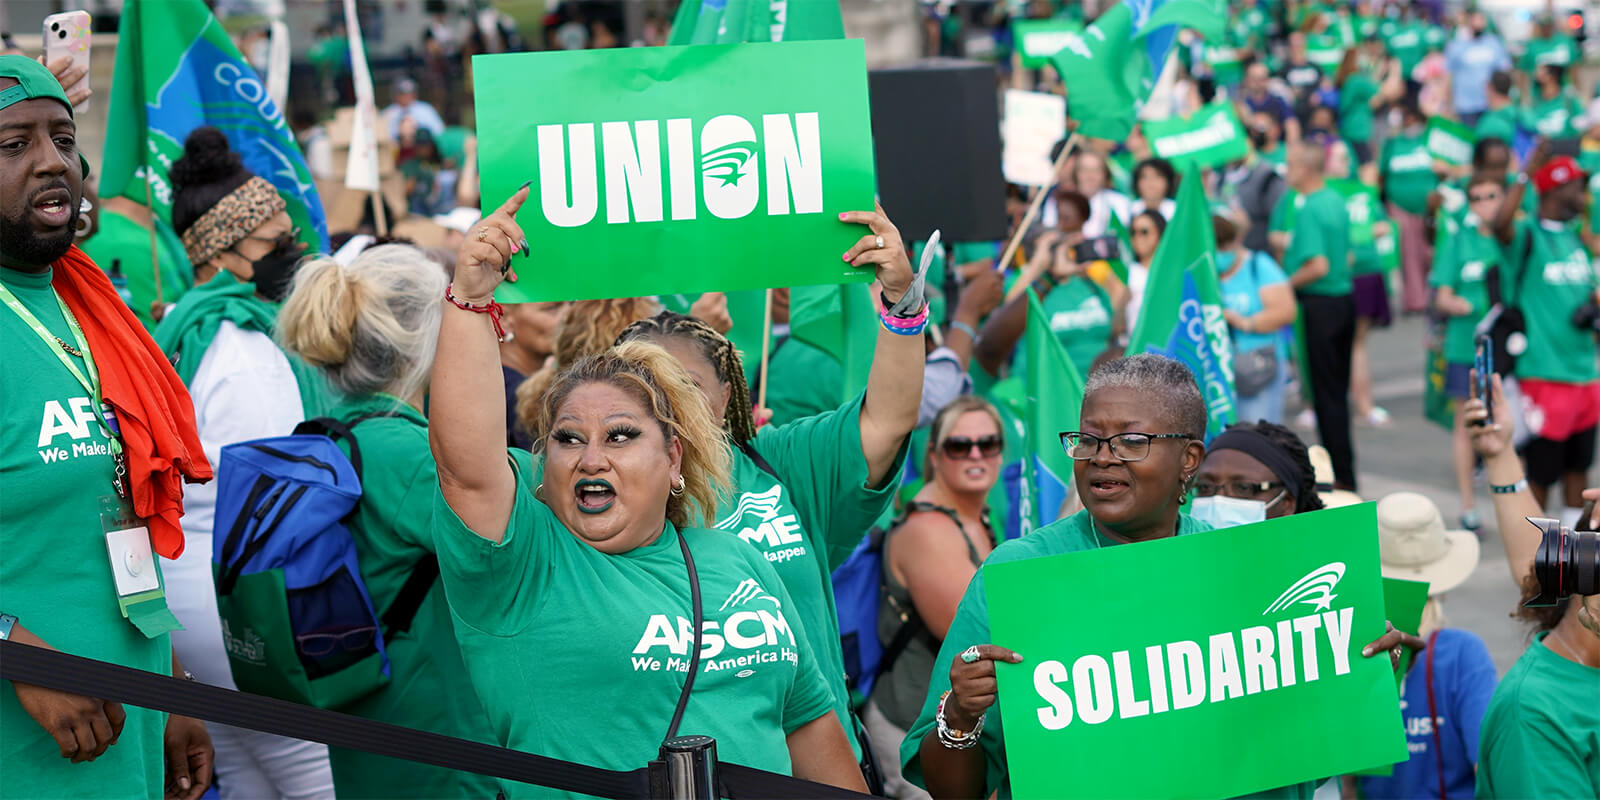 Behind the highest union approval ratings in 60 years